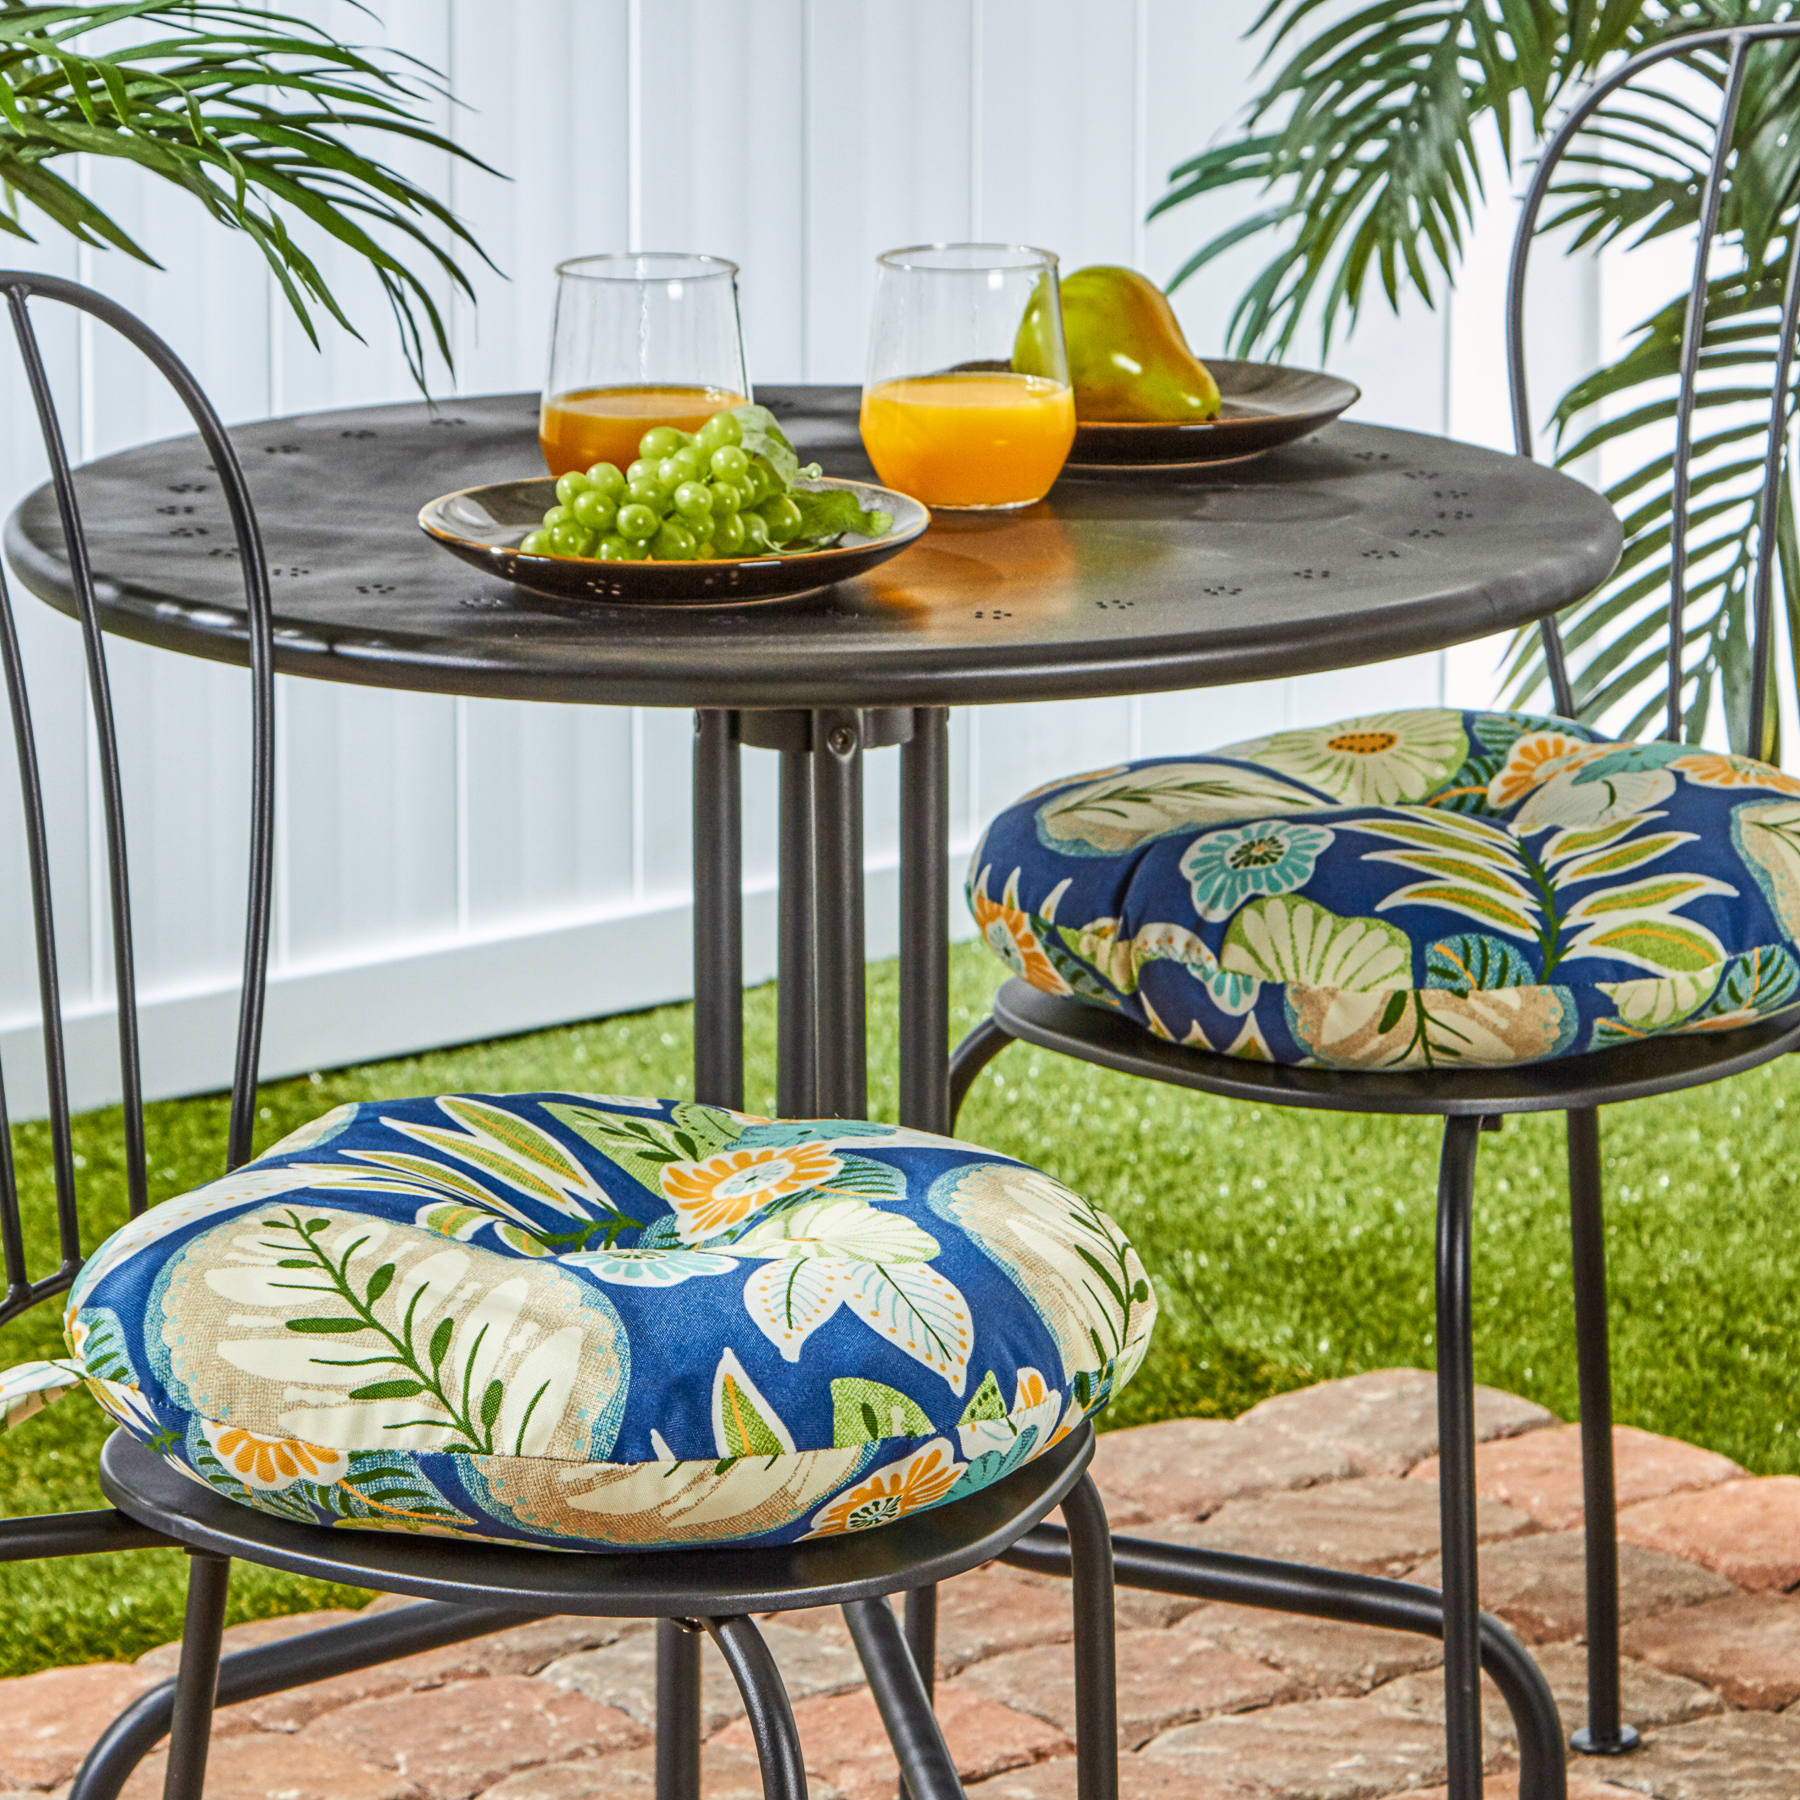 Greendale Home Fashions Marlow Blue Floral 15 in. Round Outdoor Reversible Bistro Seat Cushion (Set of 2) - image 3 of 7